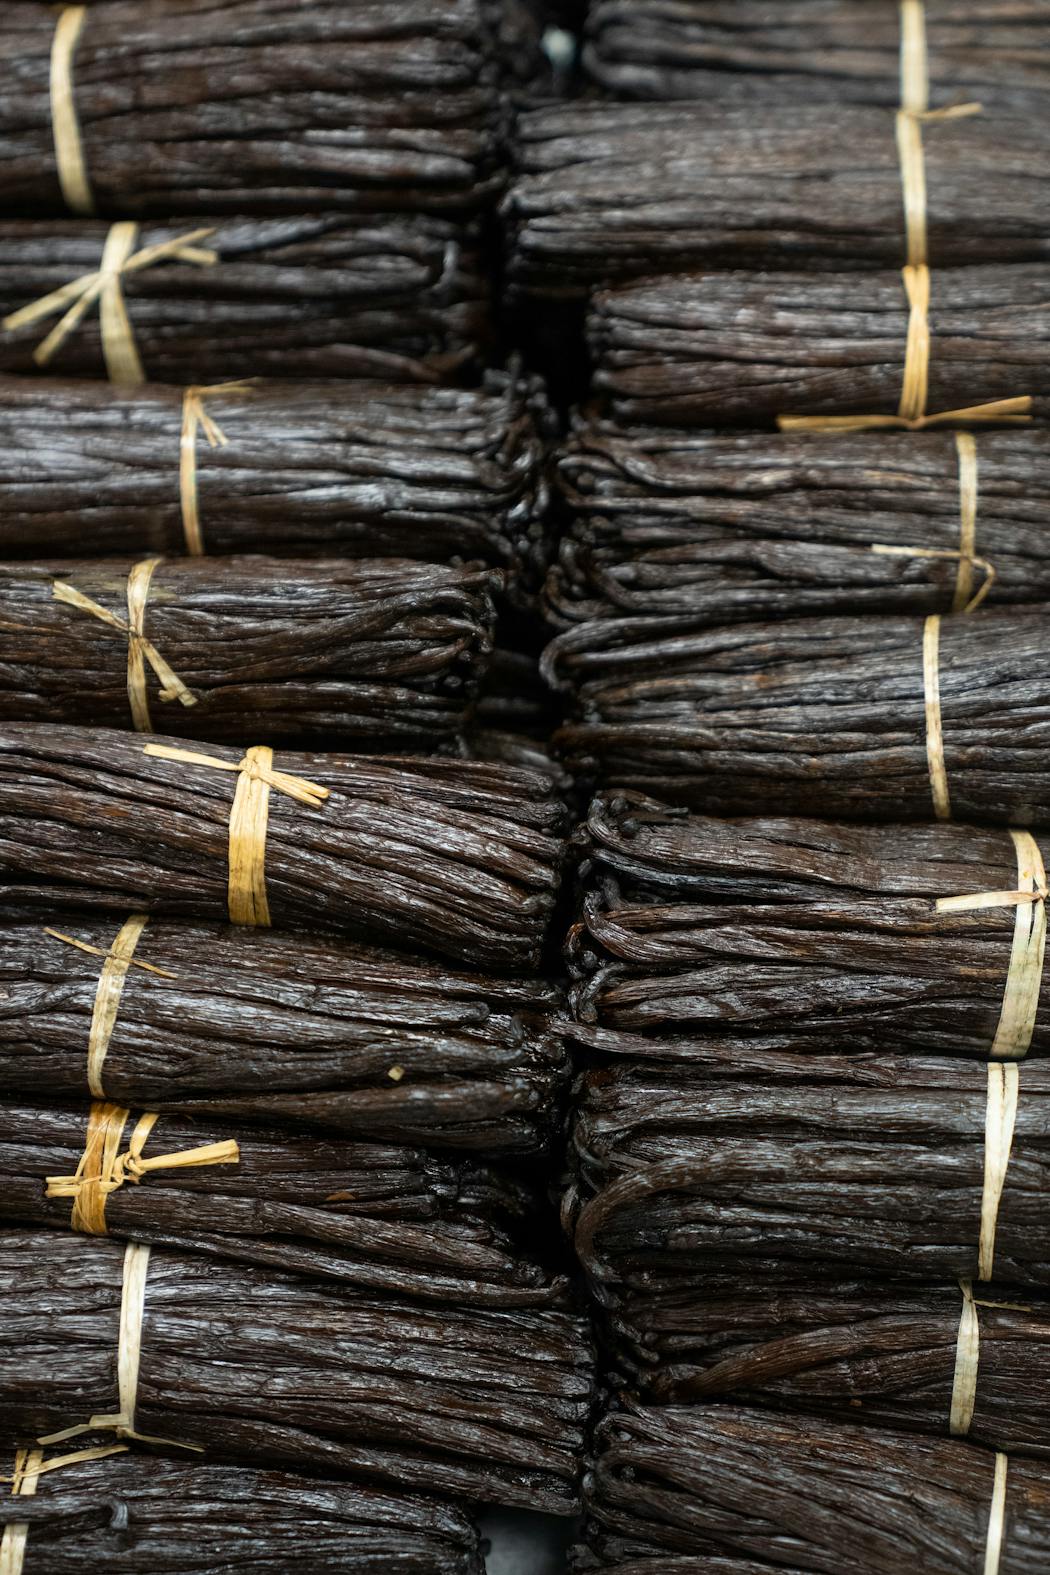 Bundles of raw vanilla beans at Vanilla Bean Project in Lakeland, which produces regenerative organic certified vanilla extract.